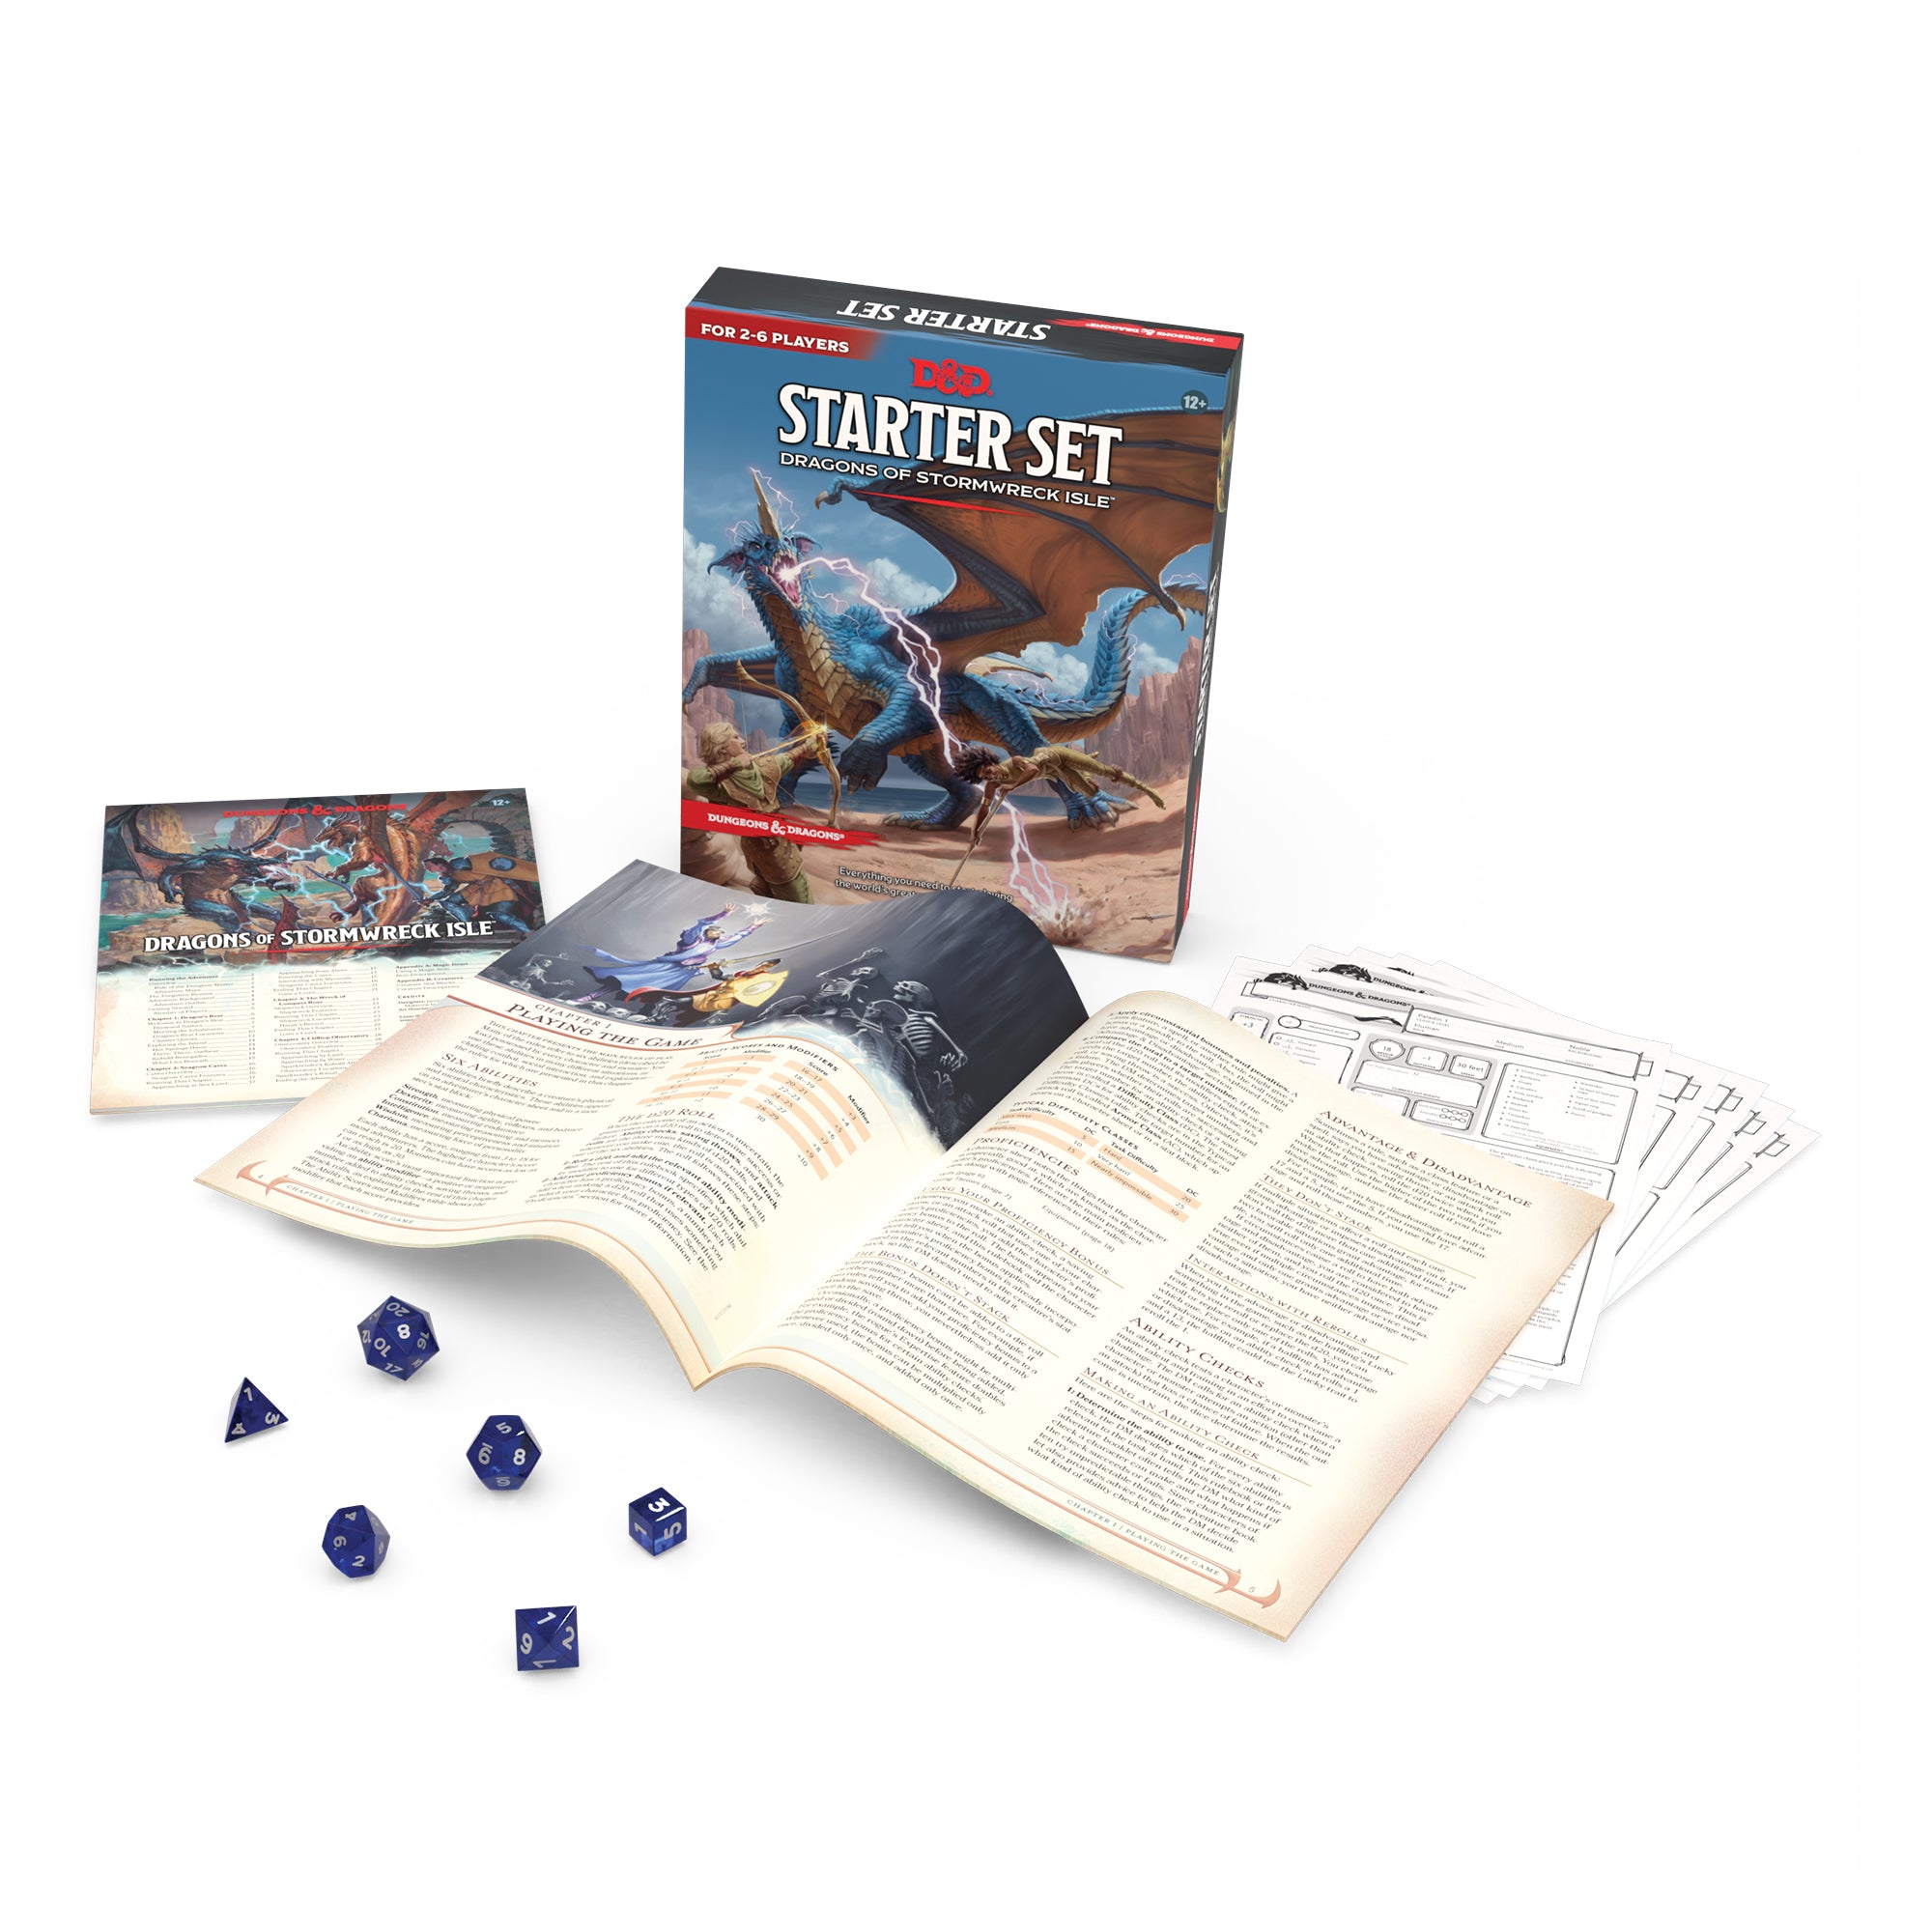 Dungeons and Dragons RPG: Starter Set Dragons od Stormwreck Isle - Bards & Cards